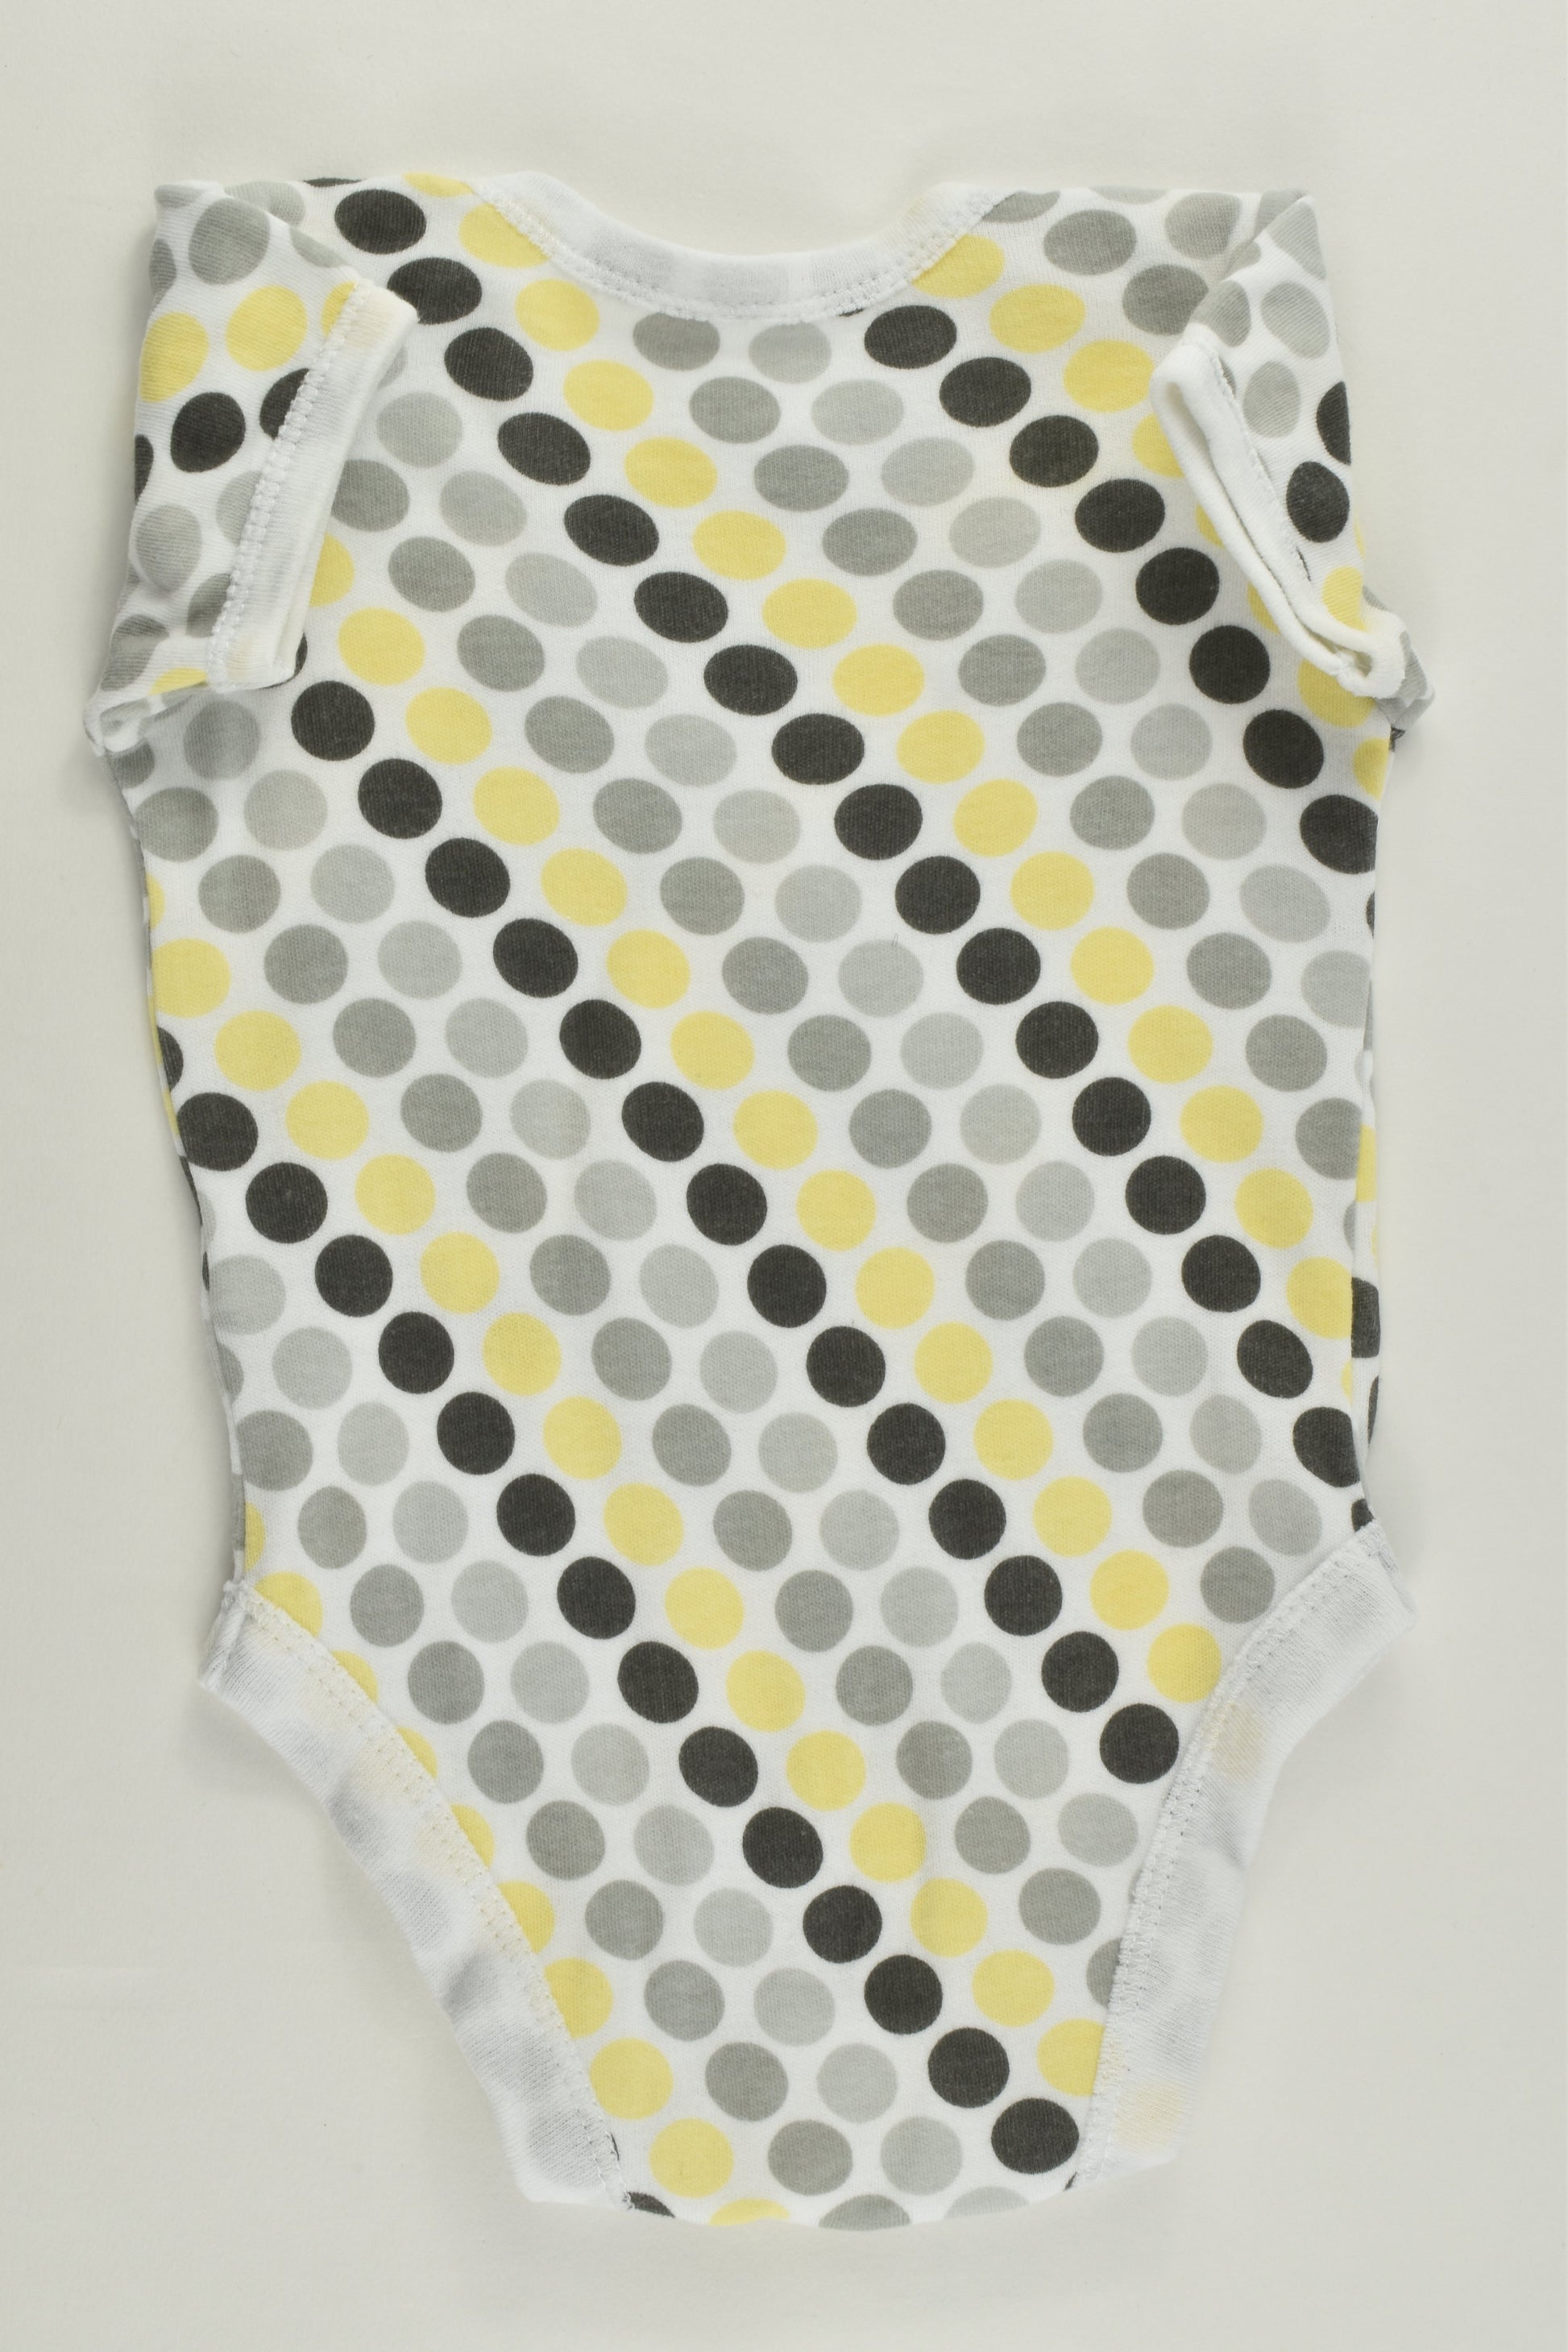 Early Days Size 000 (0-3 months) Dots Bodysuit